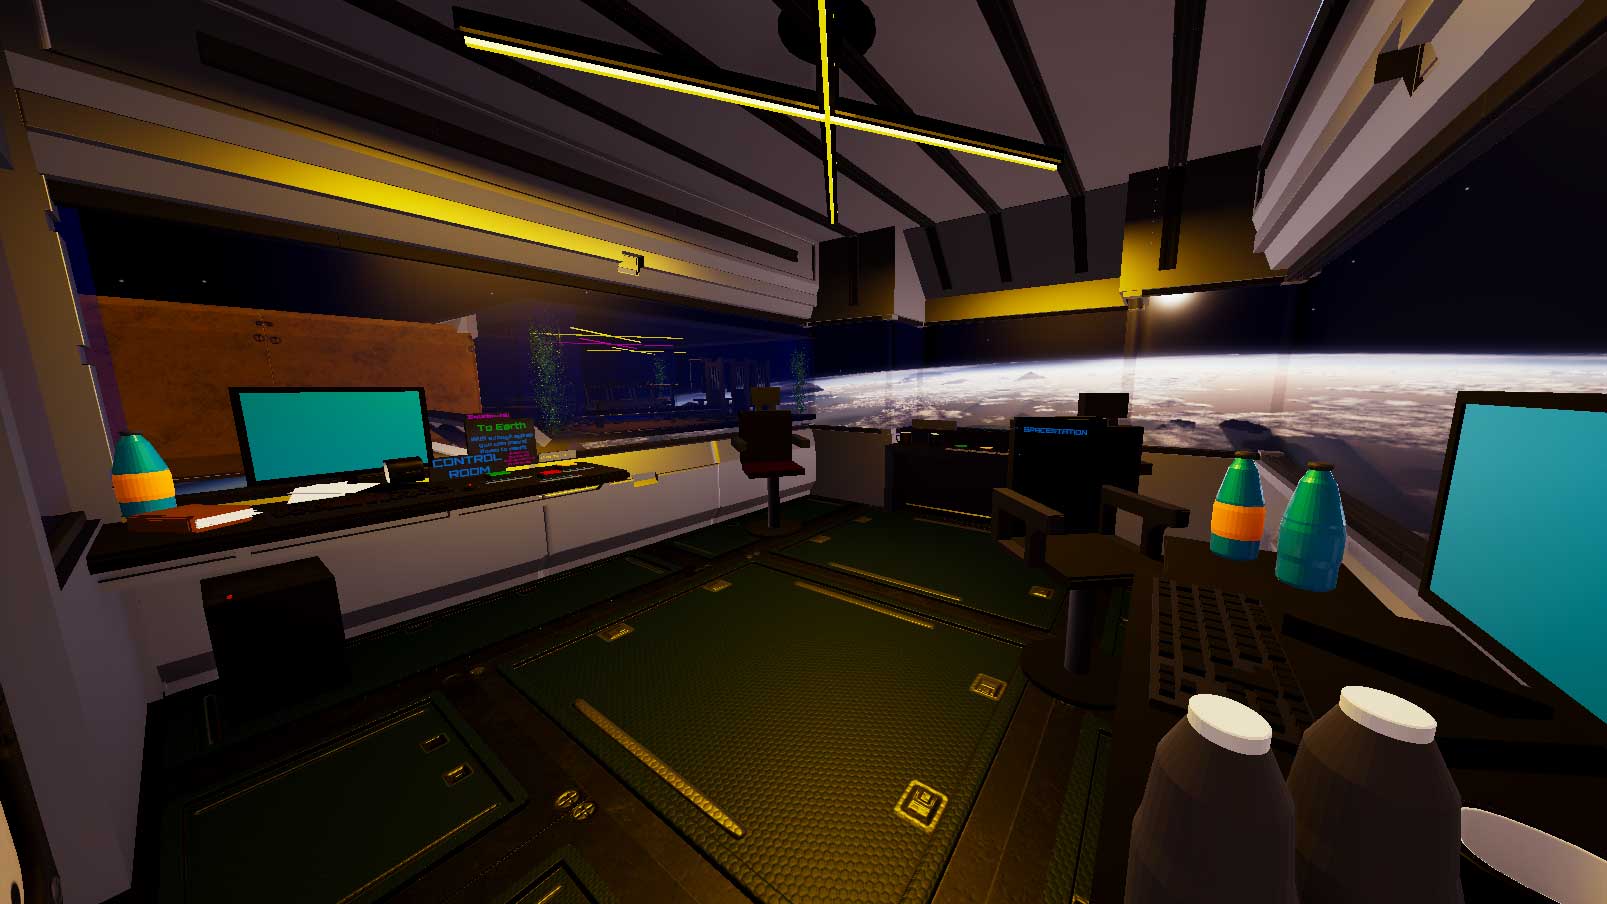 Space station control room in virtual reality.